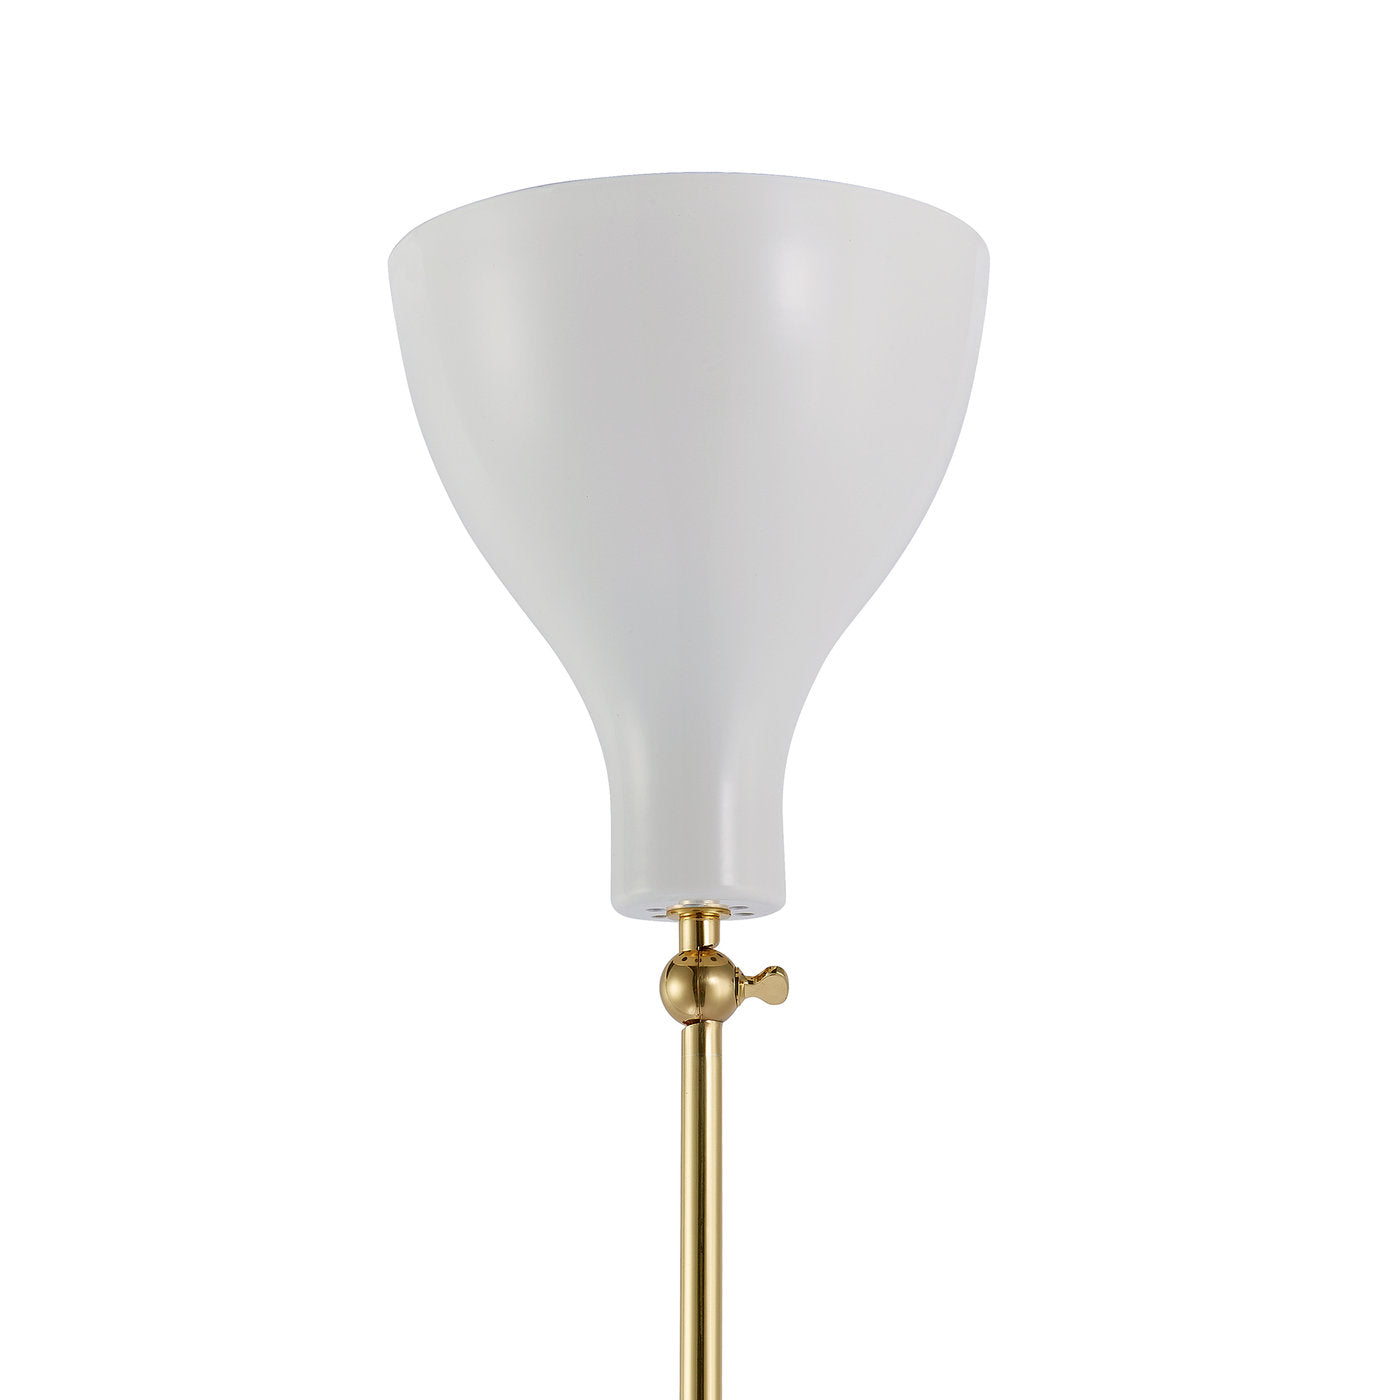 Lady V Black and White Tall Floor Lamp in Brass - Alternative view 1